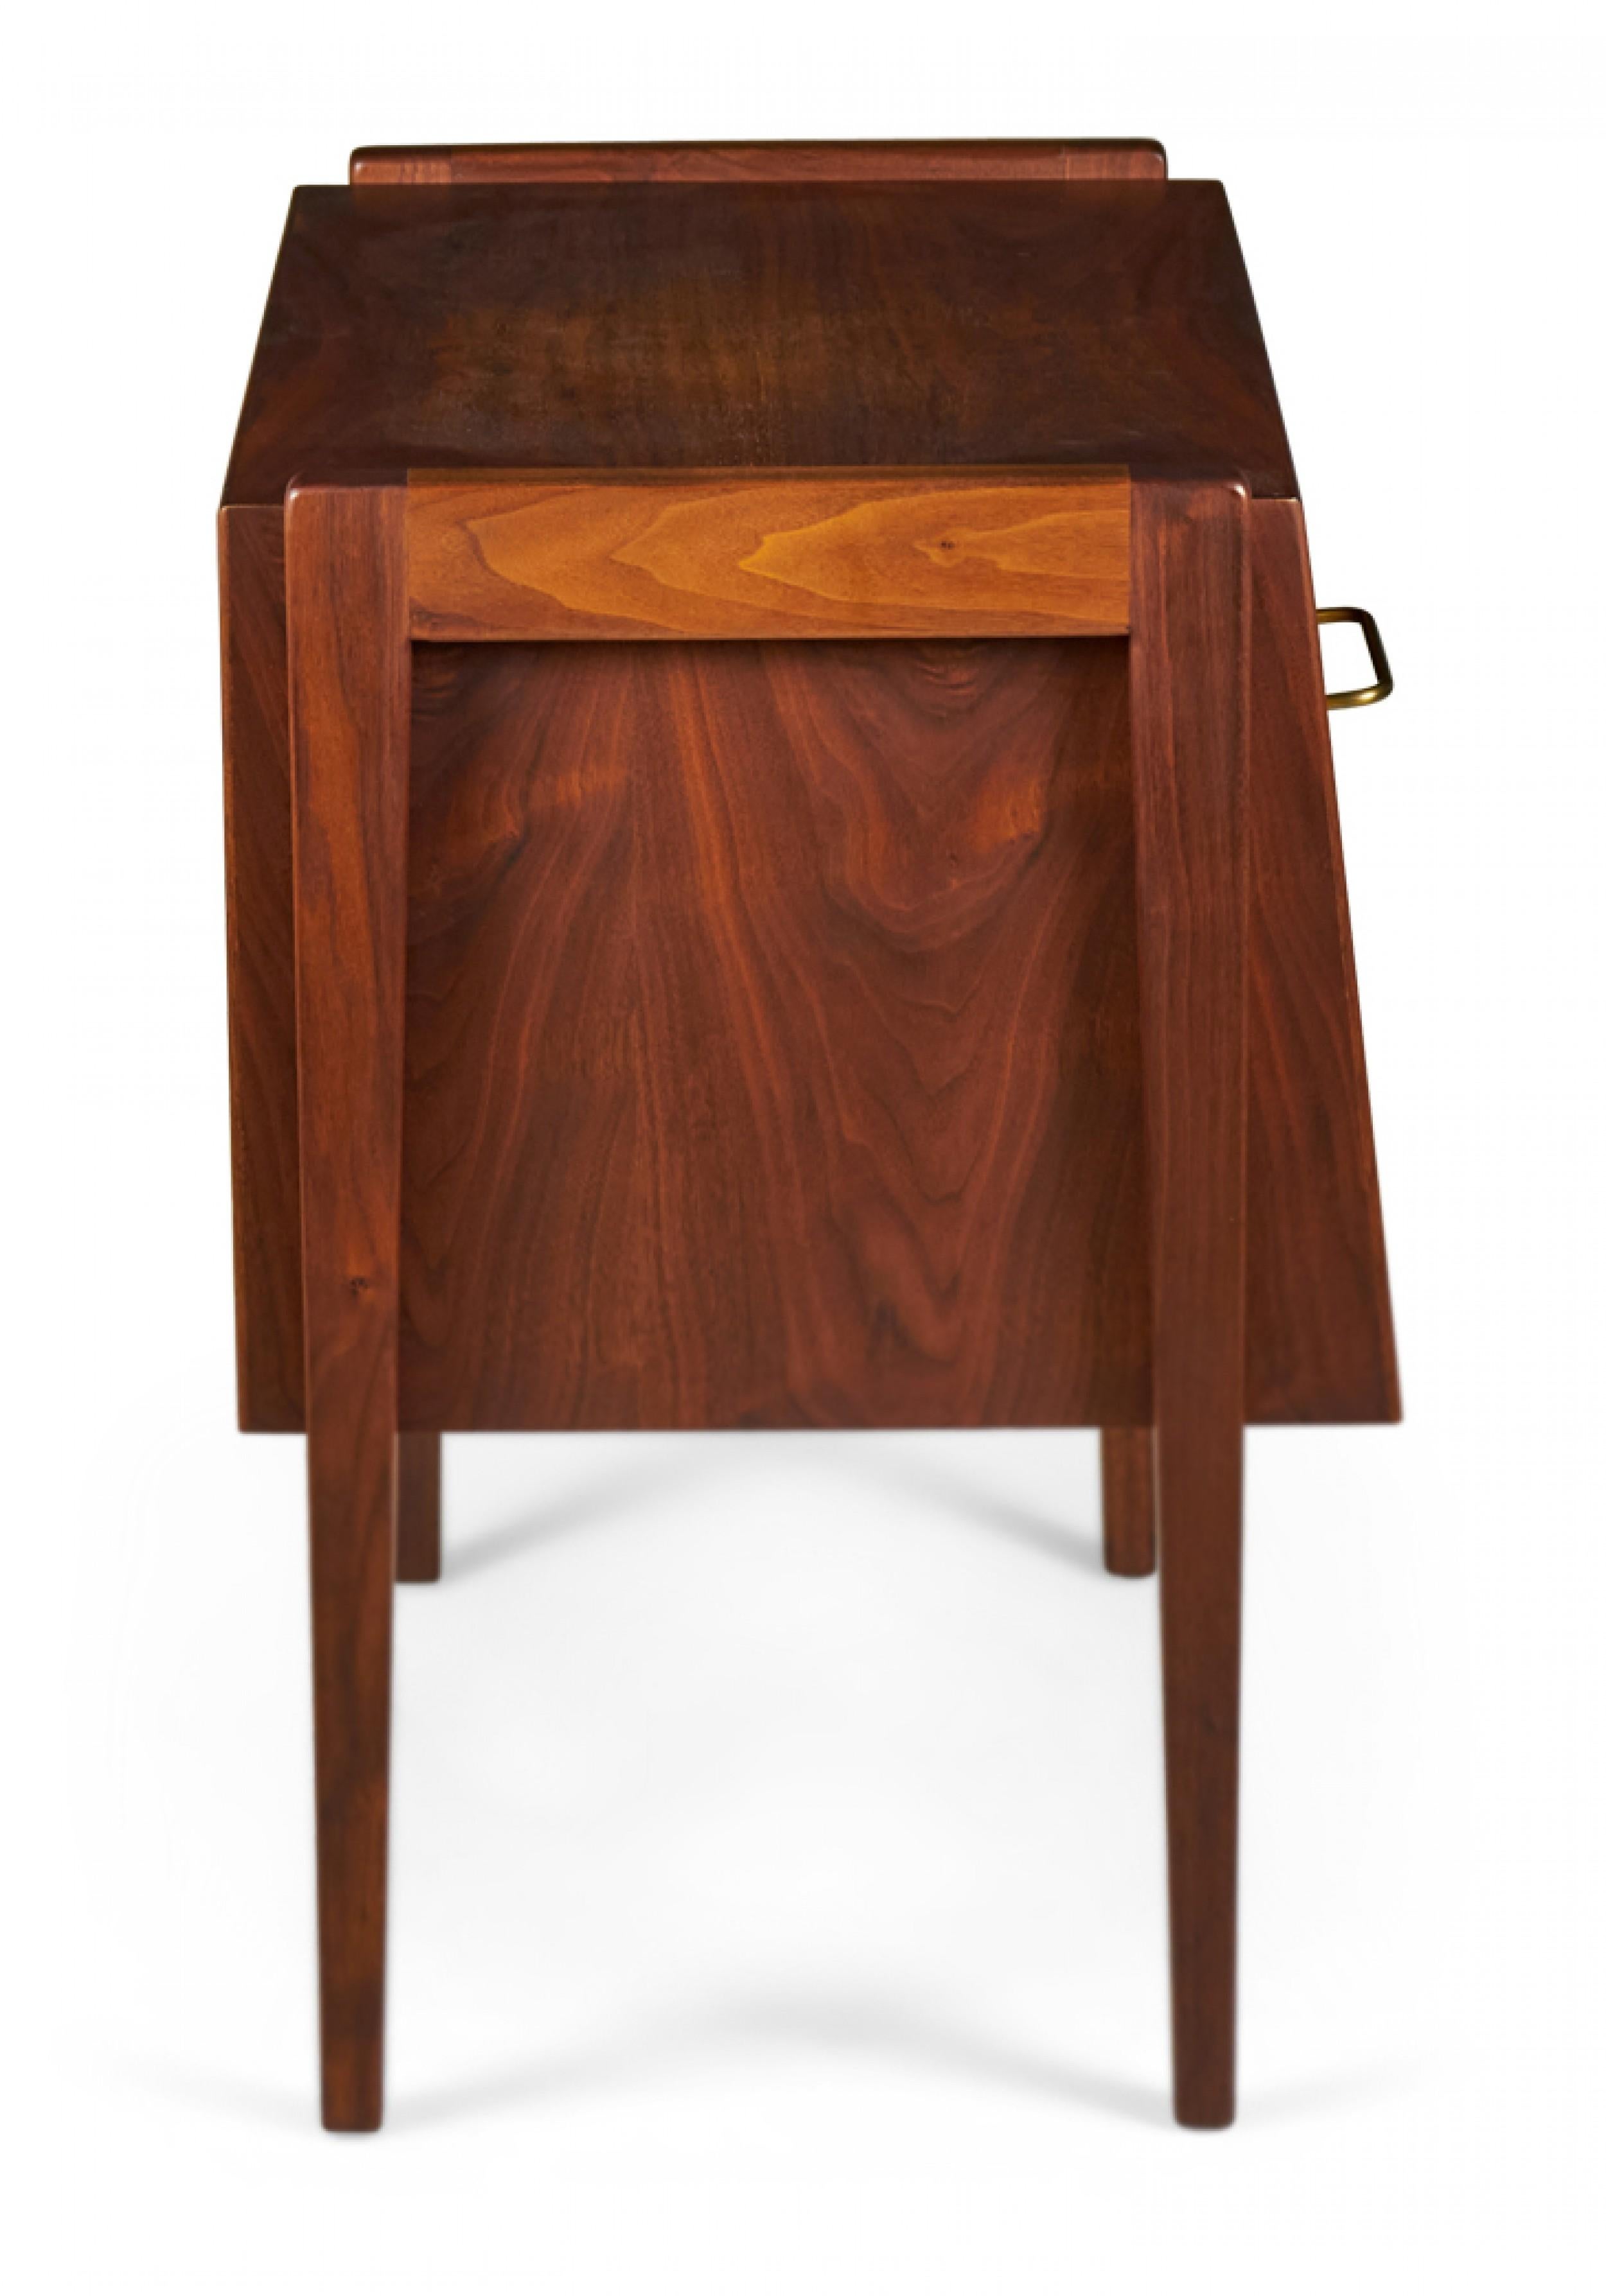 Wood Jens Risom Danish Mid-Century Fall-Front Walnut Bedside Table / Commode For Sale